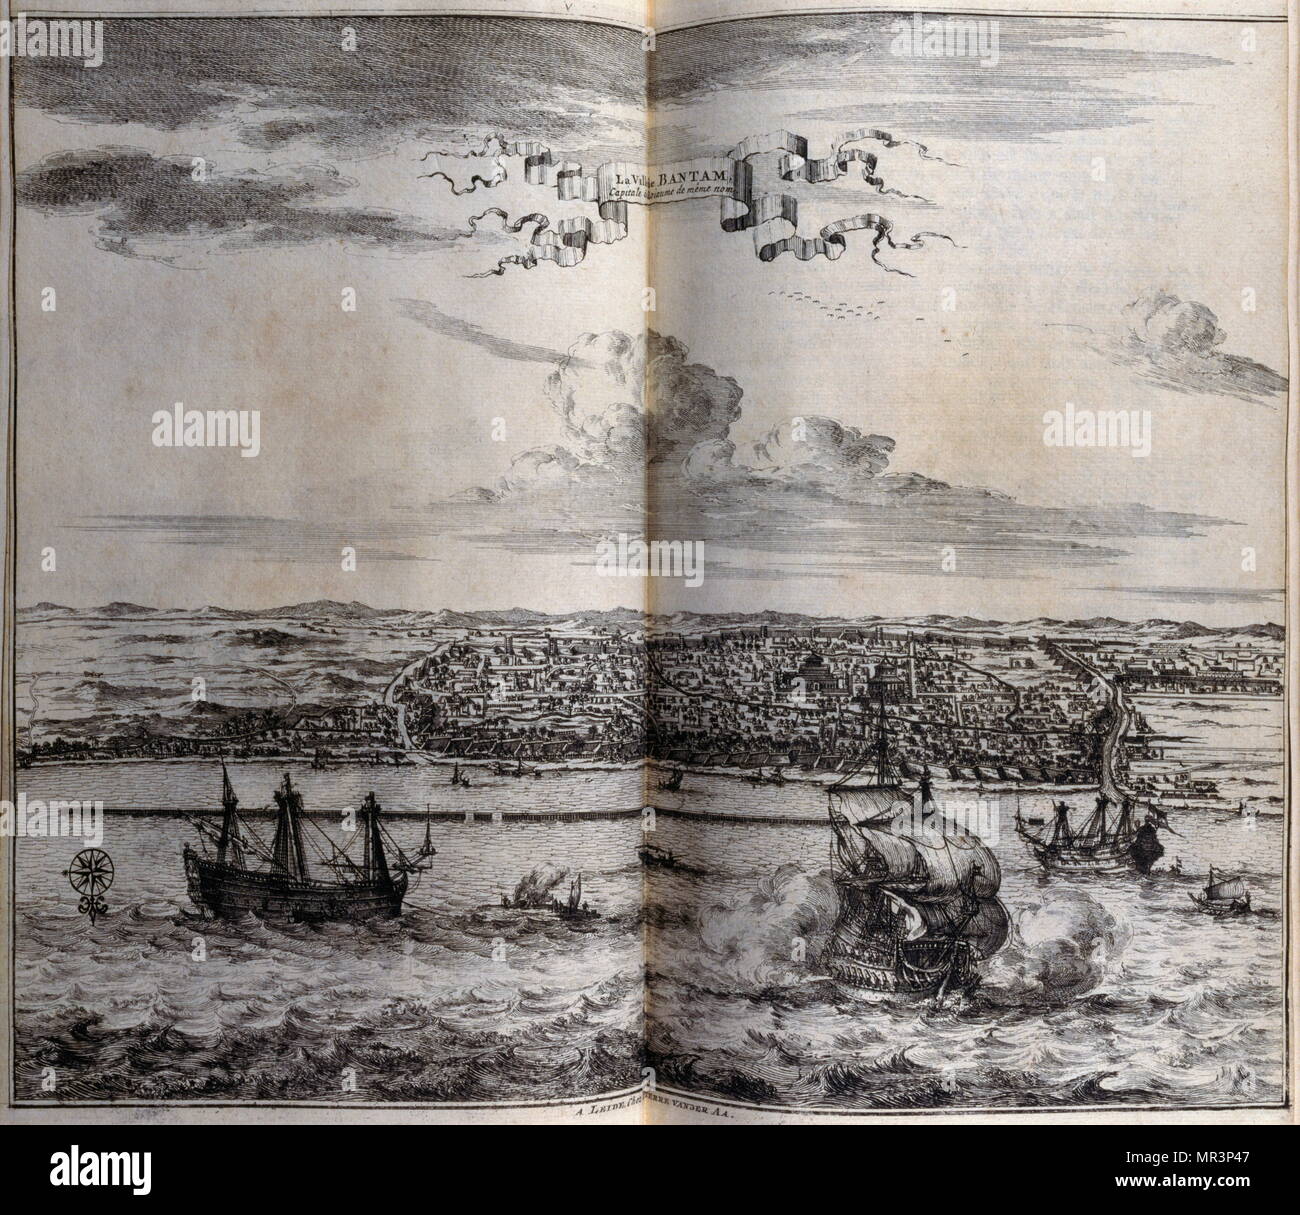 View of Banten, (Bantam), a small port town located near the western end of Java, in the Dutch East Indies (Indonesia) 1727. From voyages made to Persia and India 1727, by Johan Albrecht de Mandelslo (1616–1644). seventeenth-century German adventurer, who wrote about his travels through Persia and India. Stock Photo